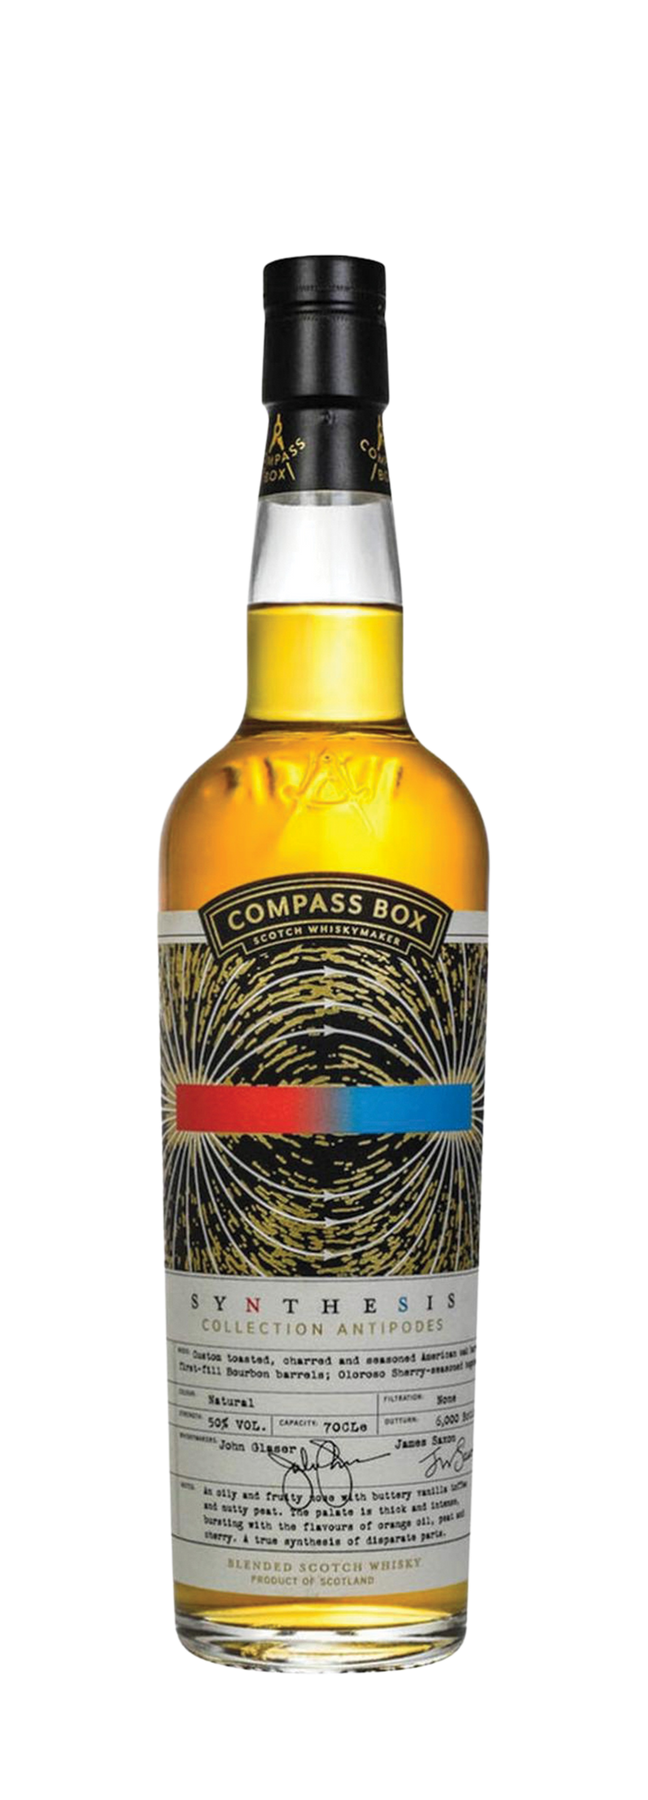 Compass Box Synthesis Antipodes 50% 70cl